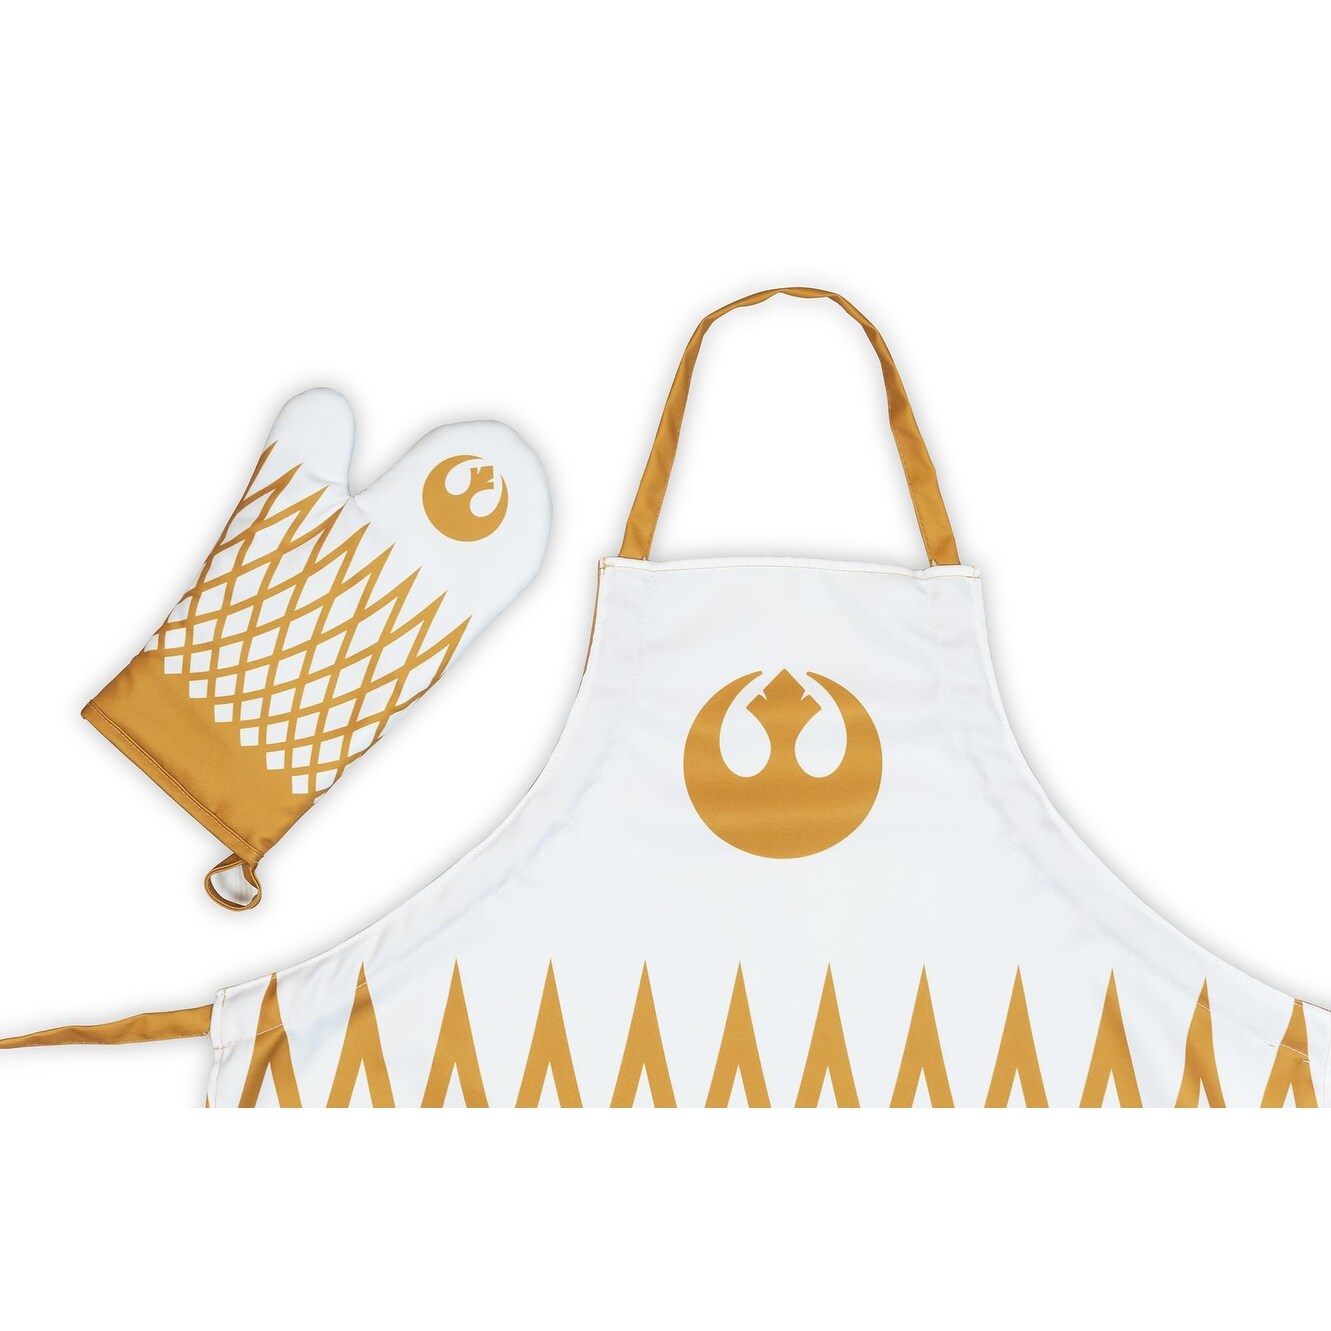 https://ak1.ostkcdn.com/images/products/is/images/direct/8e42461b26372a47f3707b12dc08f903509106ab/Star-Wars-White-Gold-Adult-Apron-%26-Oven-Mitt-Set---Rebel-Design.jpg